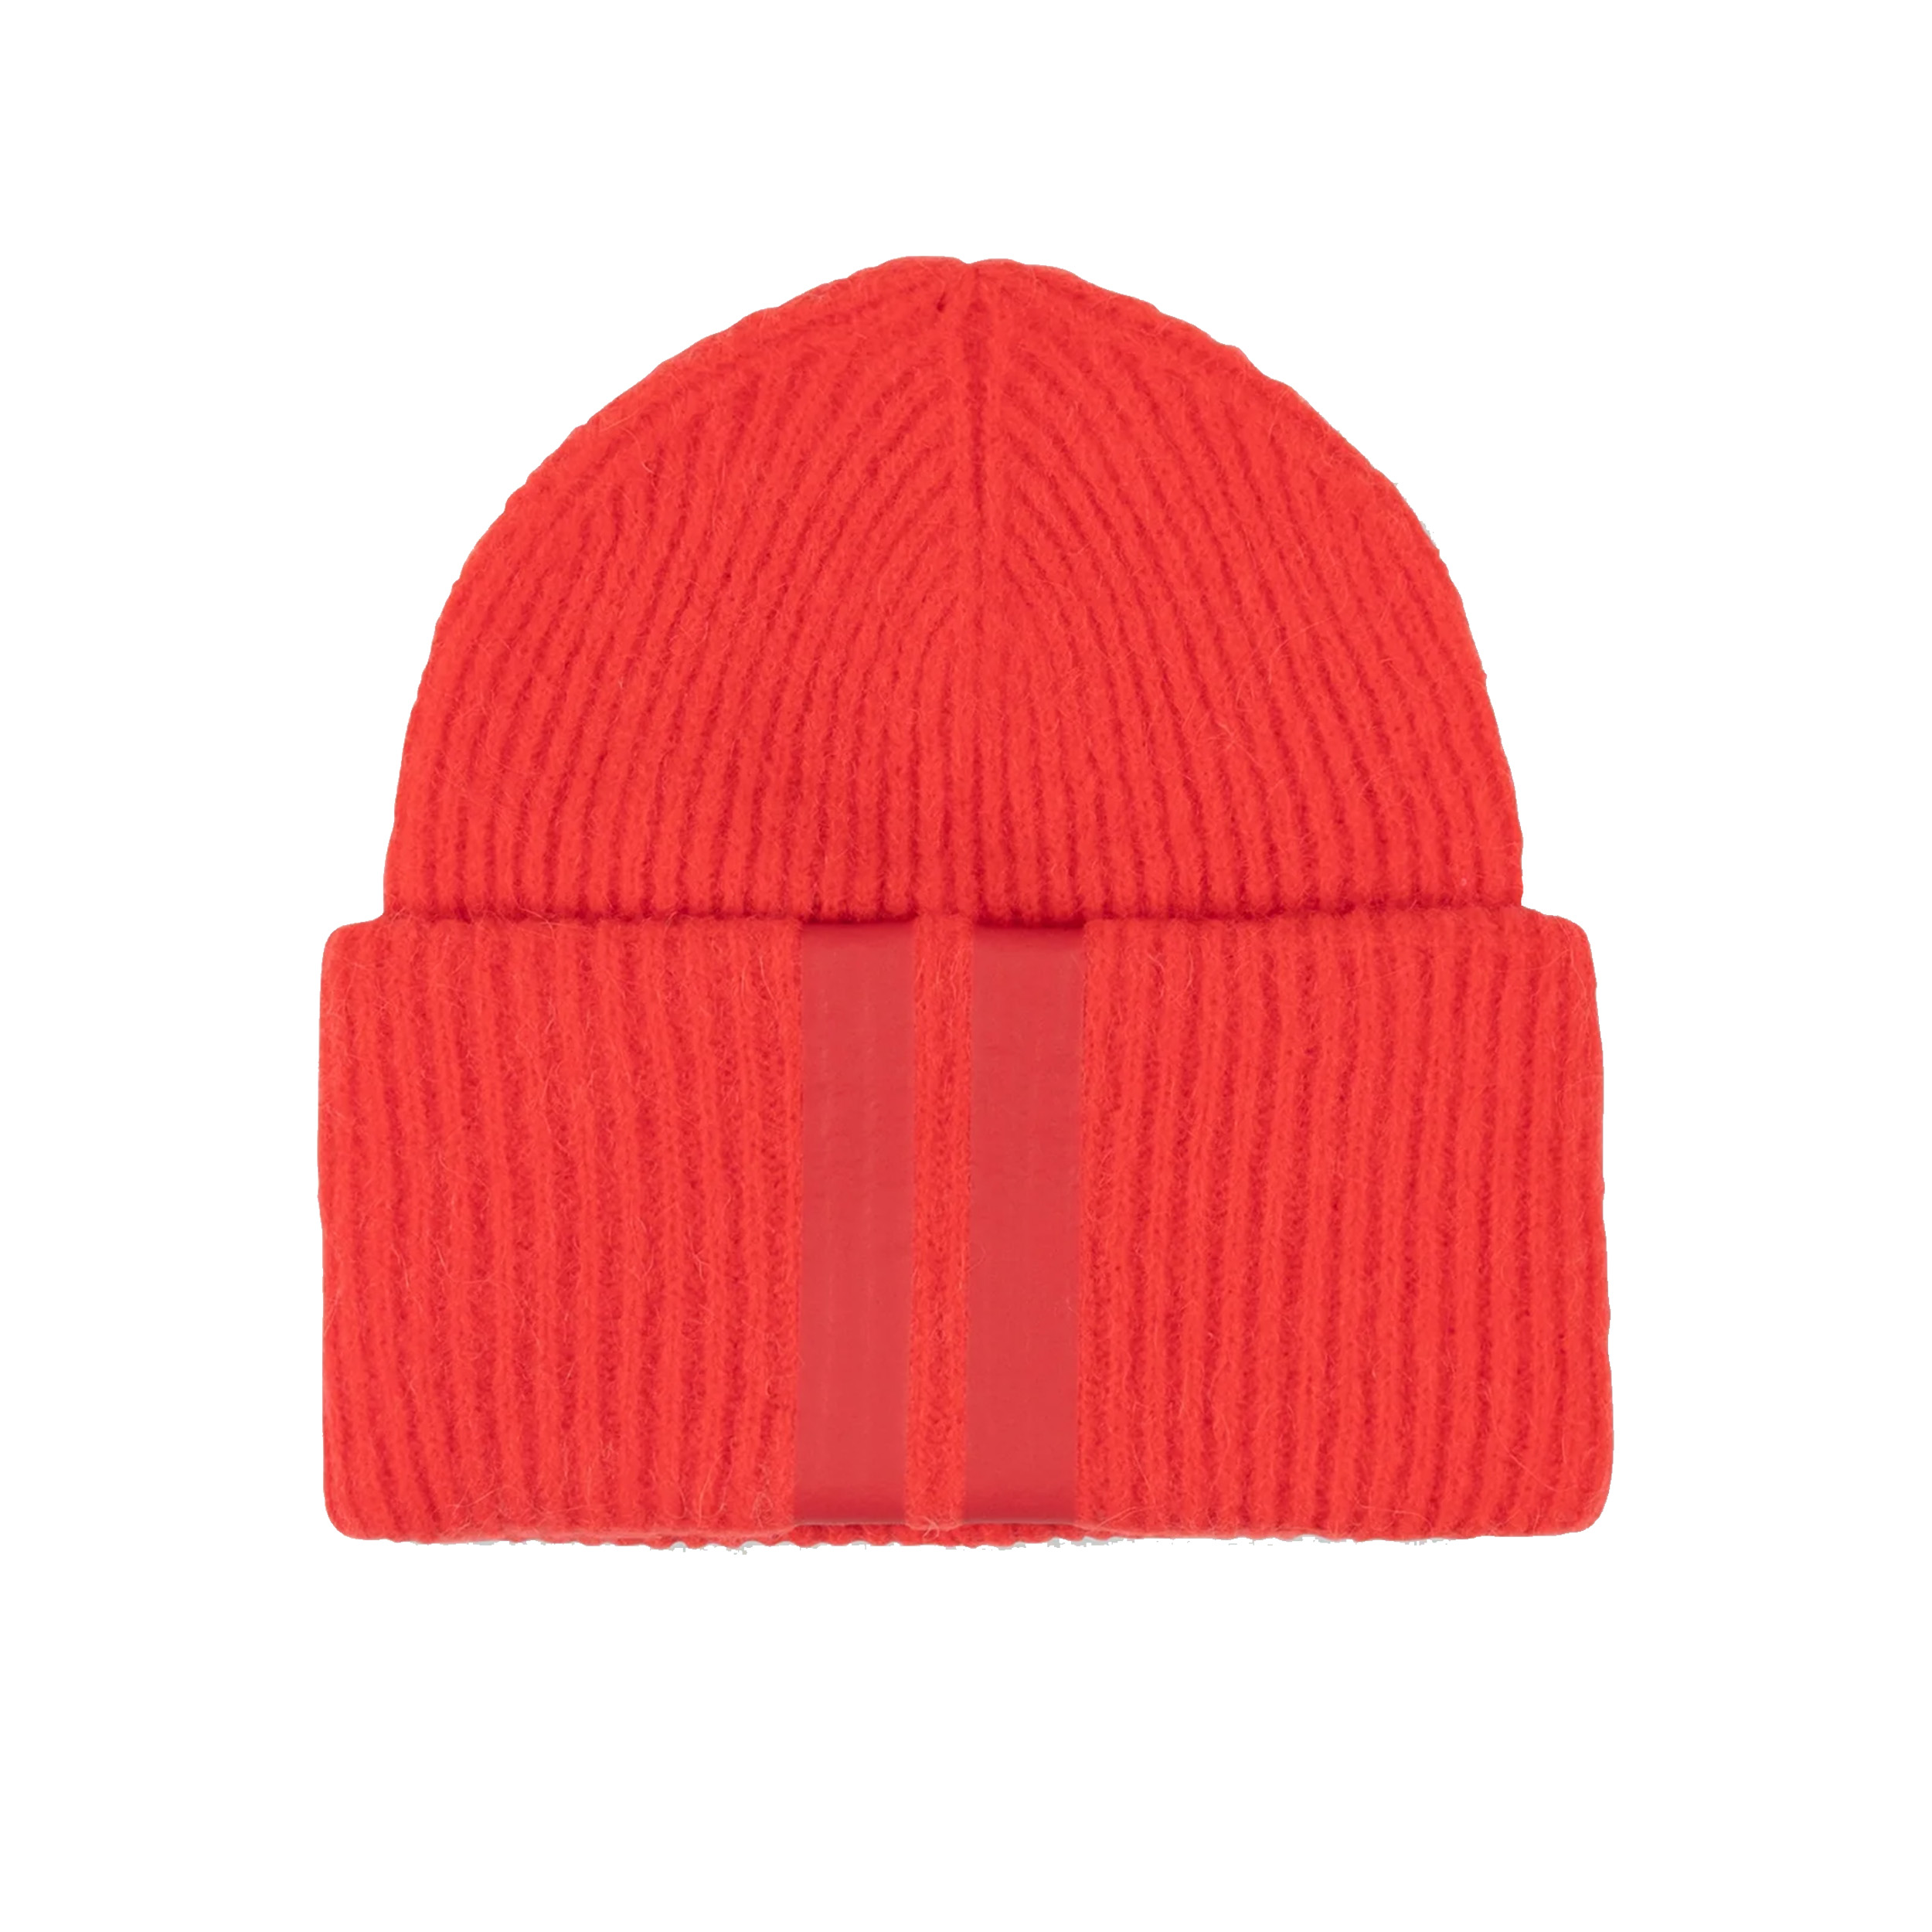 10DAYS Soft Knit Beanie Coral Red